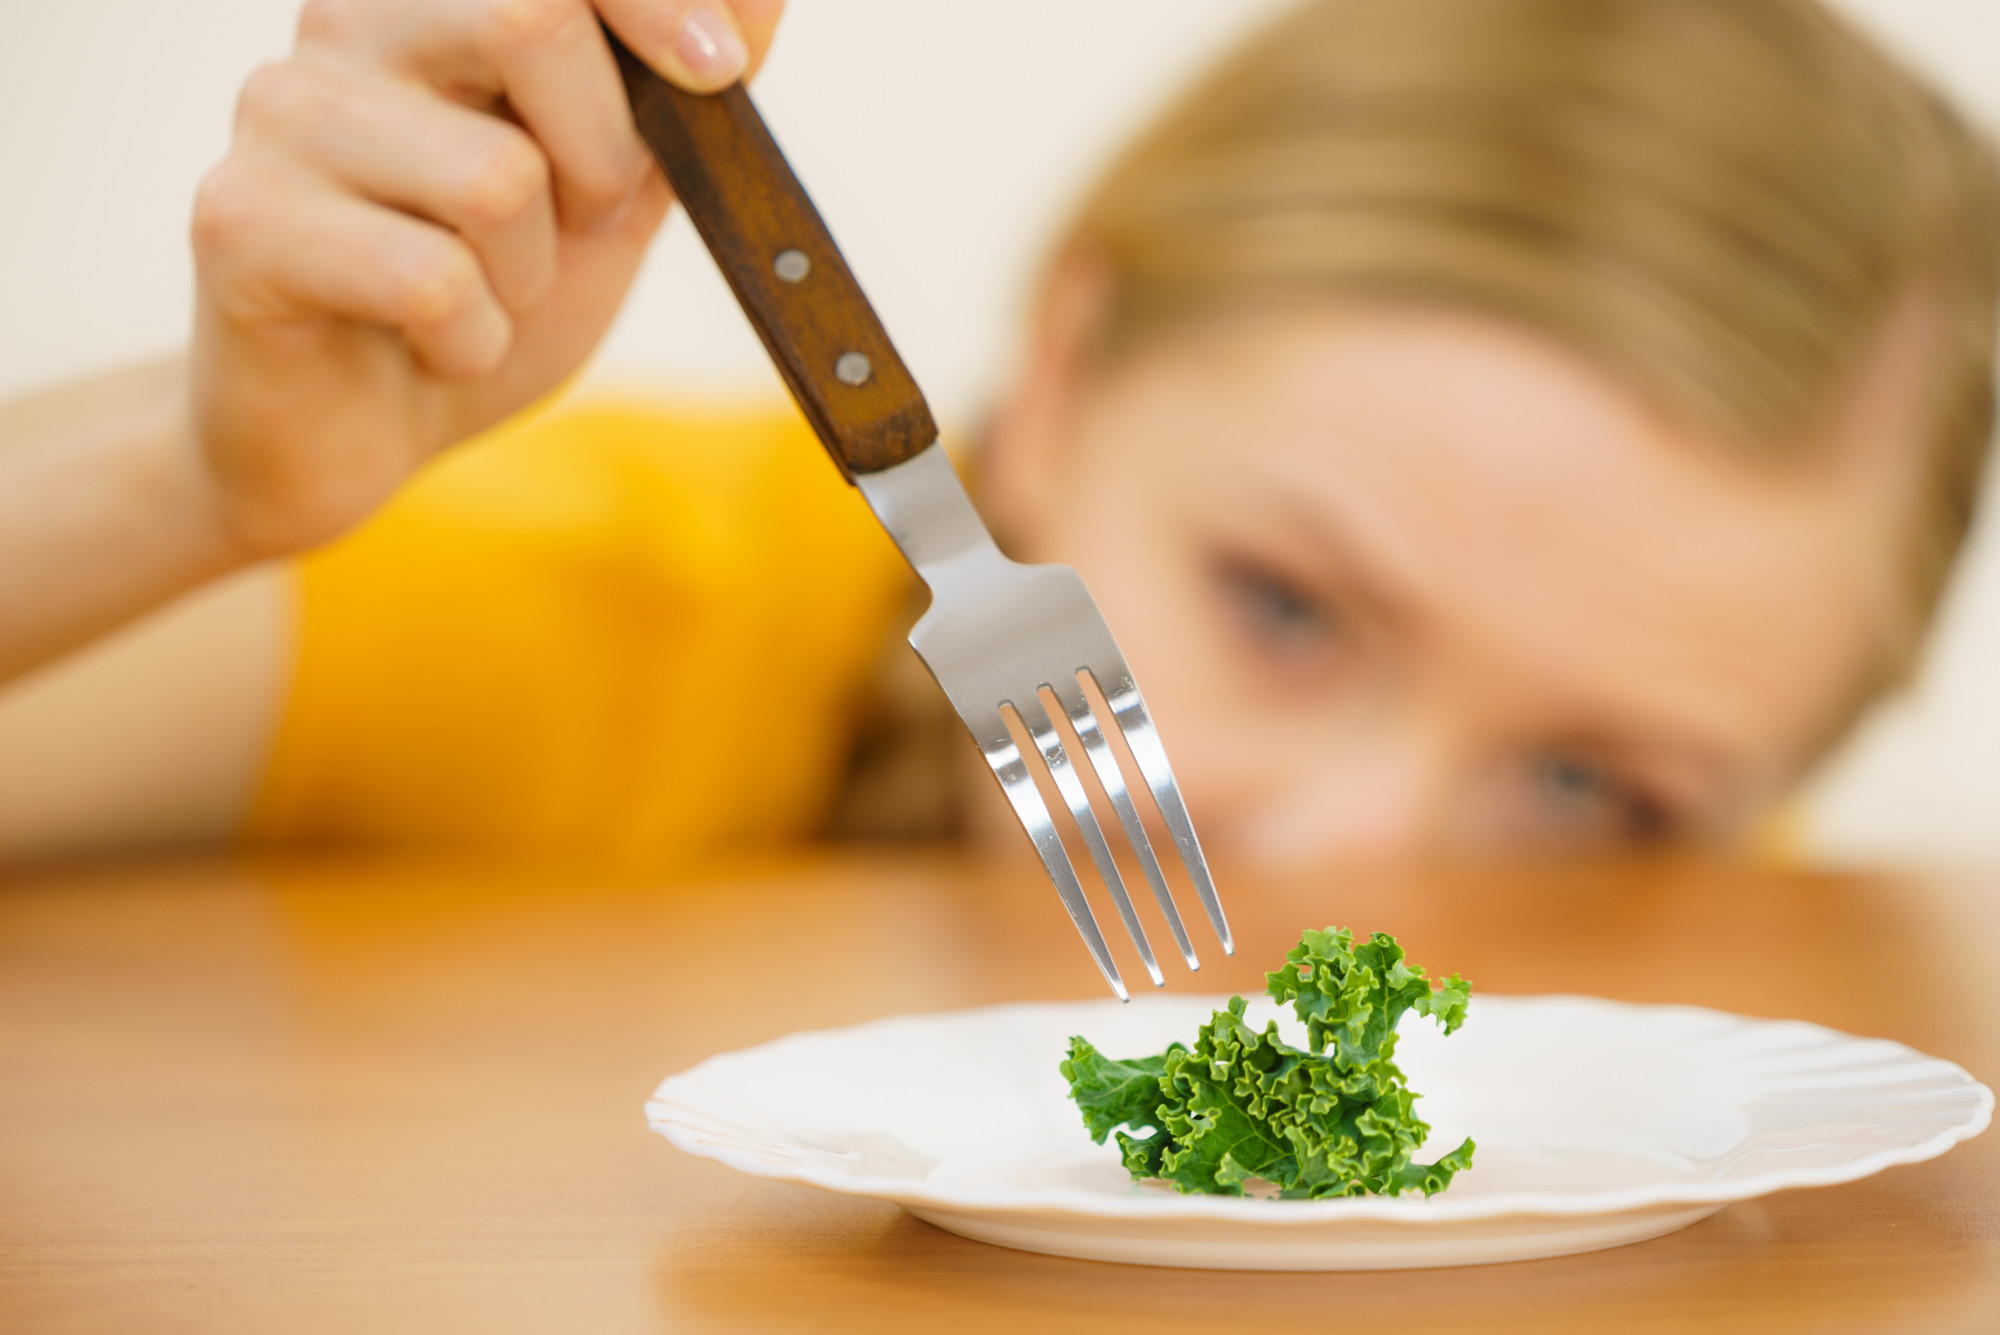 person eating single piece of lettuce on plate